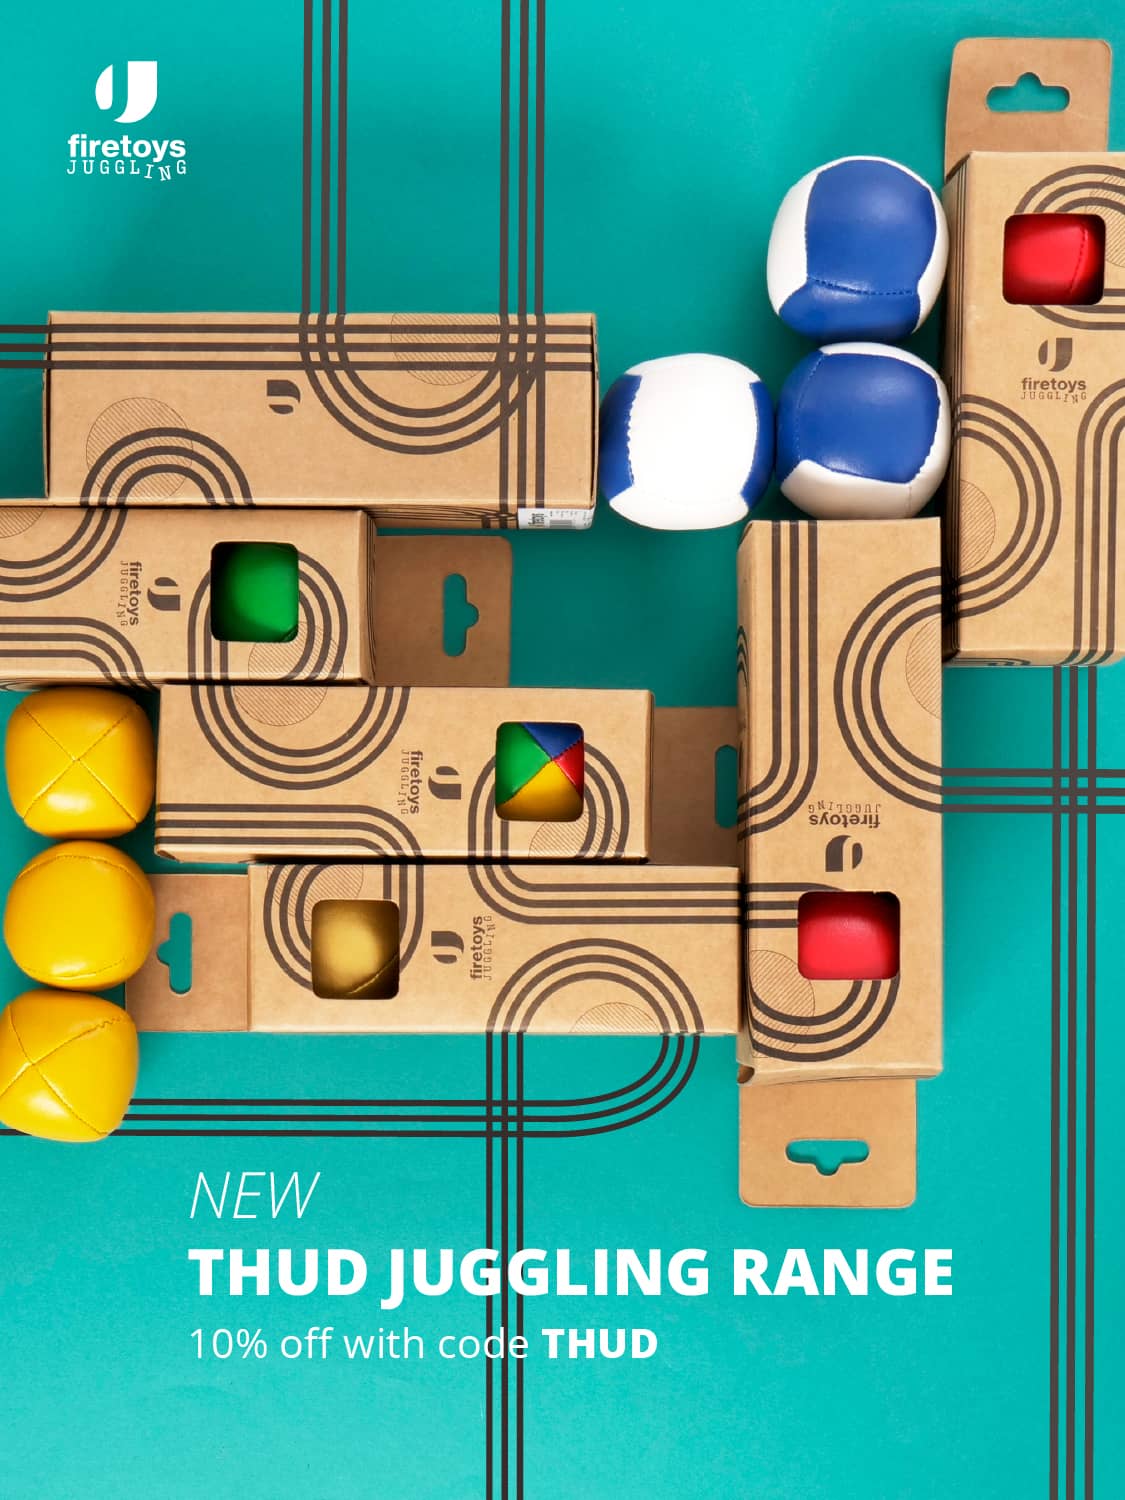 Sale banner promoting 10% off thud juggling ball range with the code 'THUD'